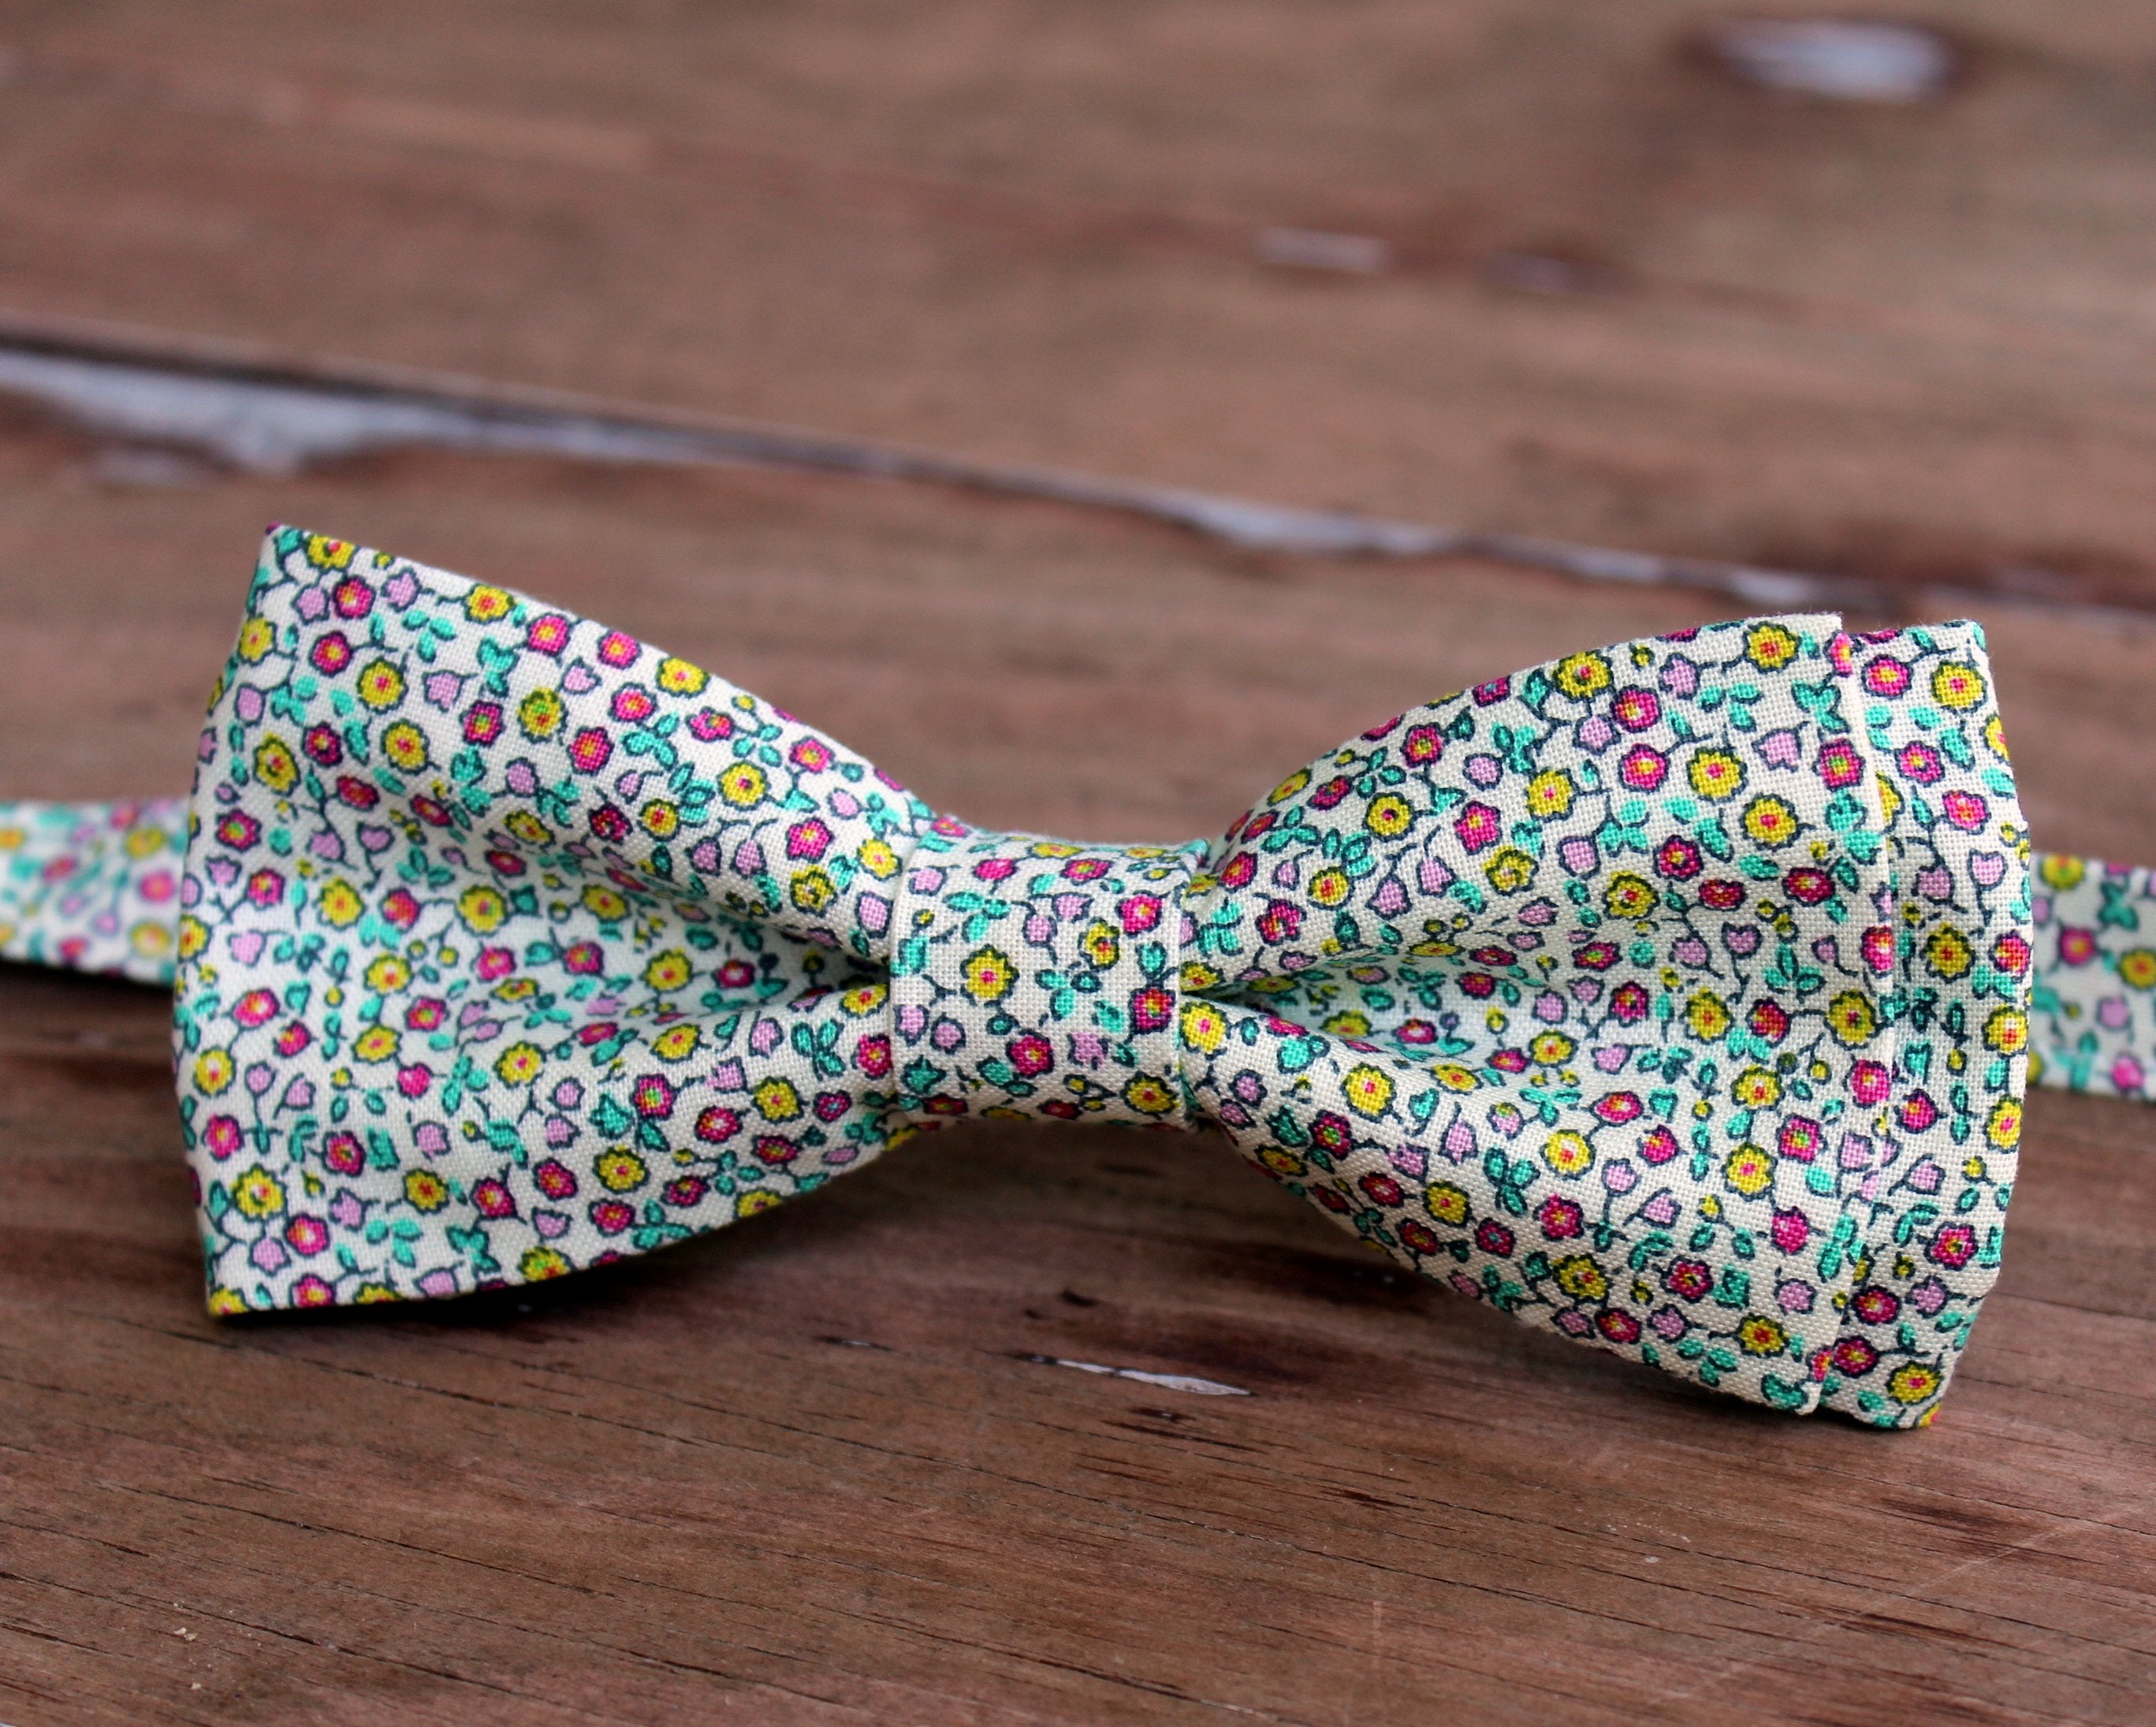 Details about   New Liberty of London Pastel Pink Blue Yellow Bow Tie.